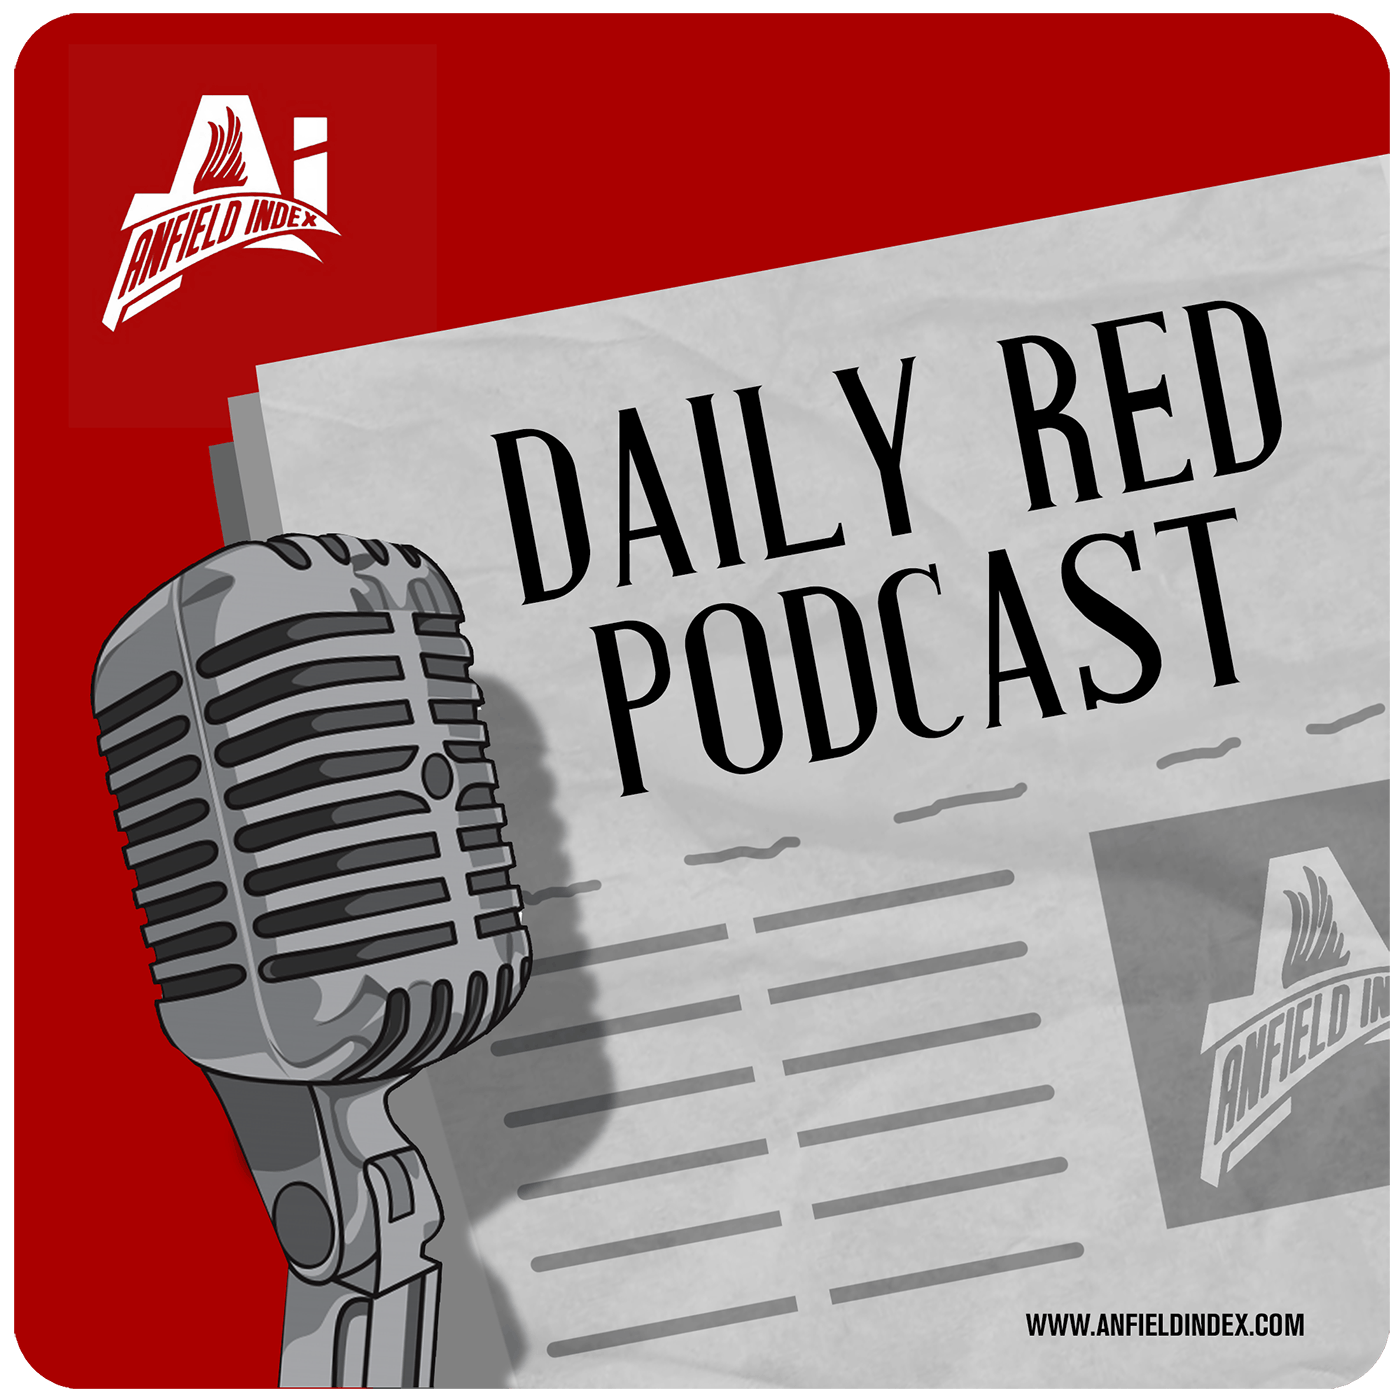 Title Still In Sight - Daily Red Podcast